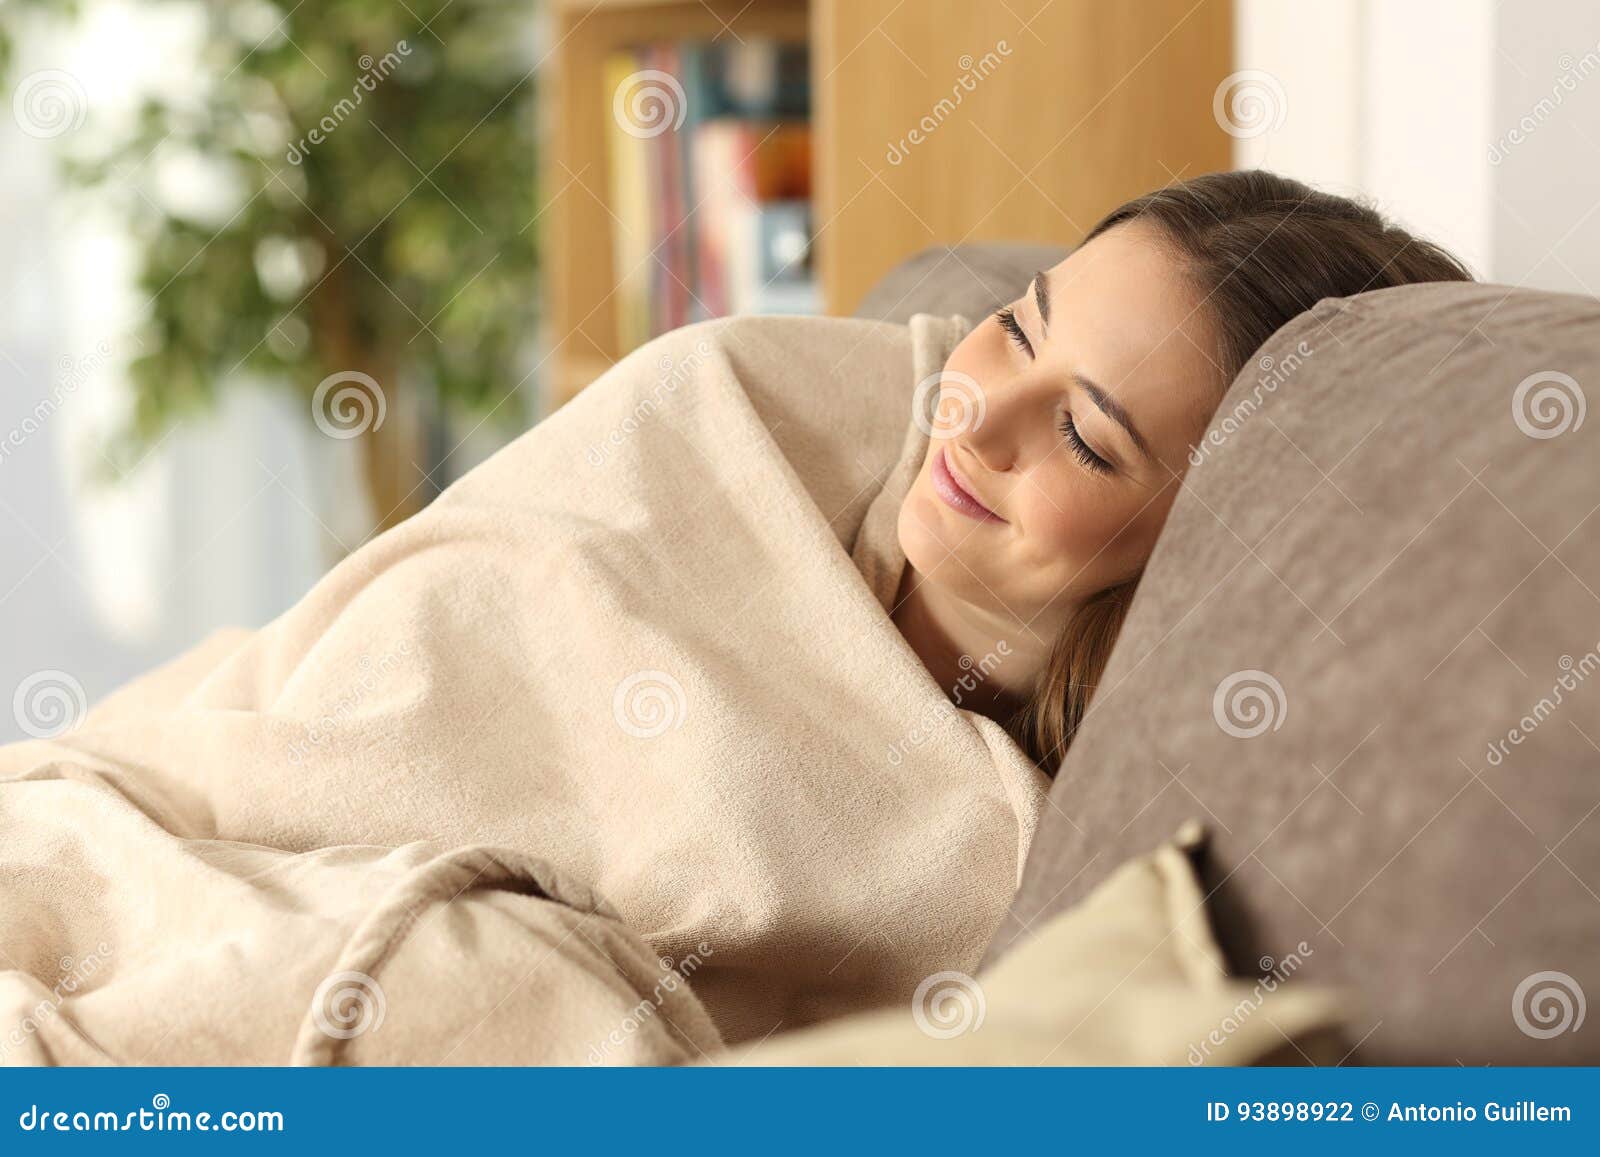 girl sleeping warmly on a comfortable couch